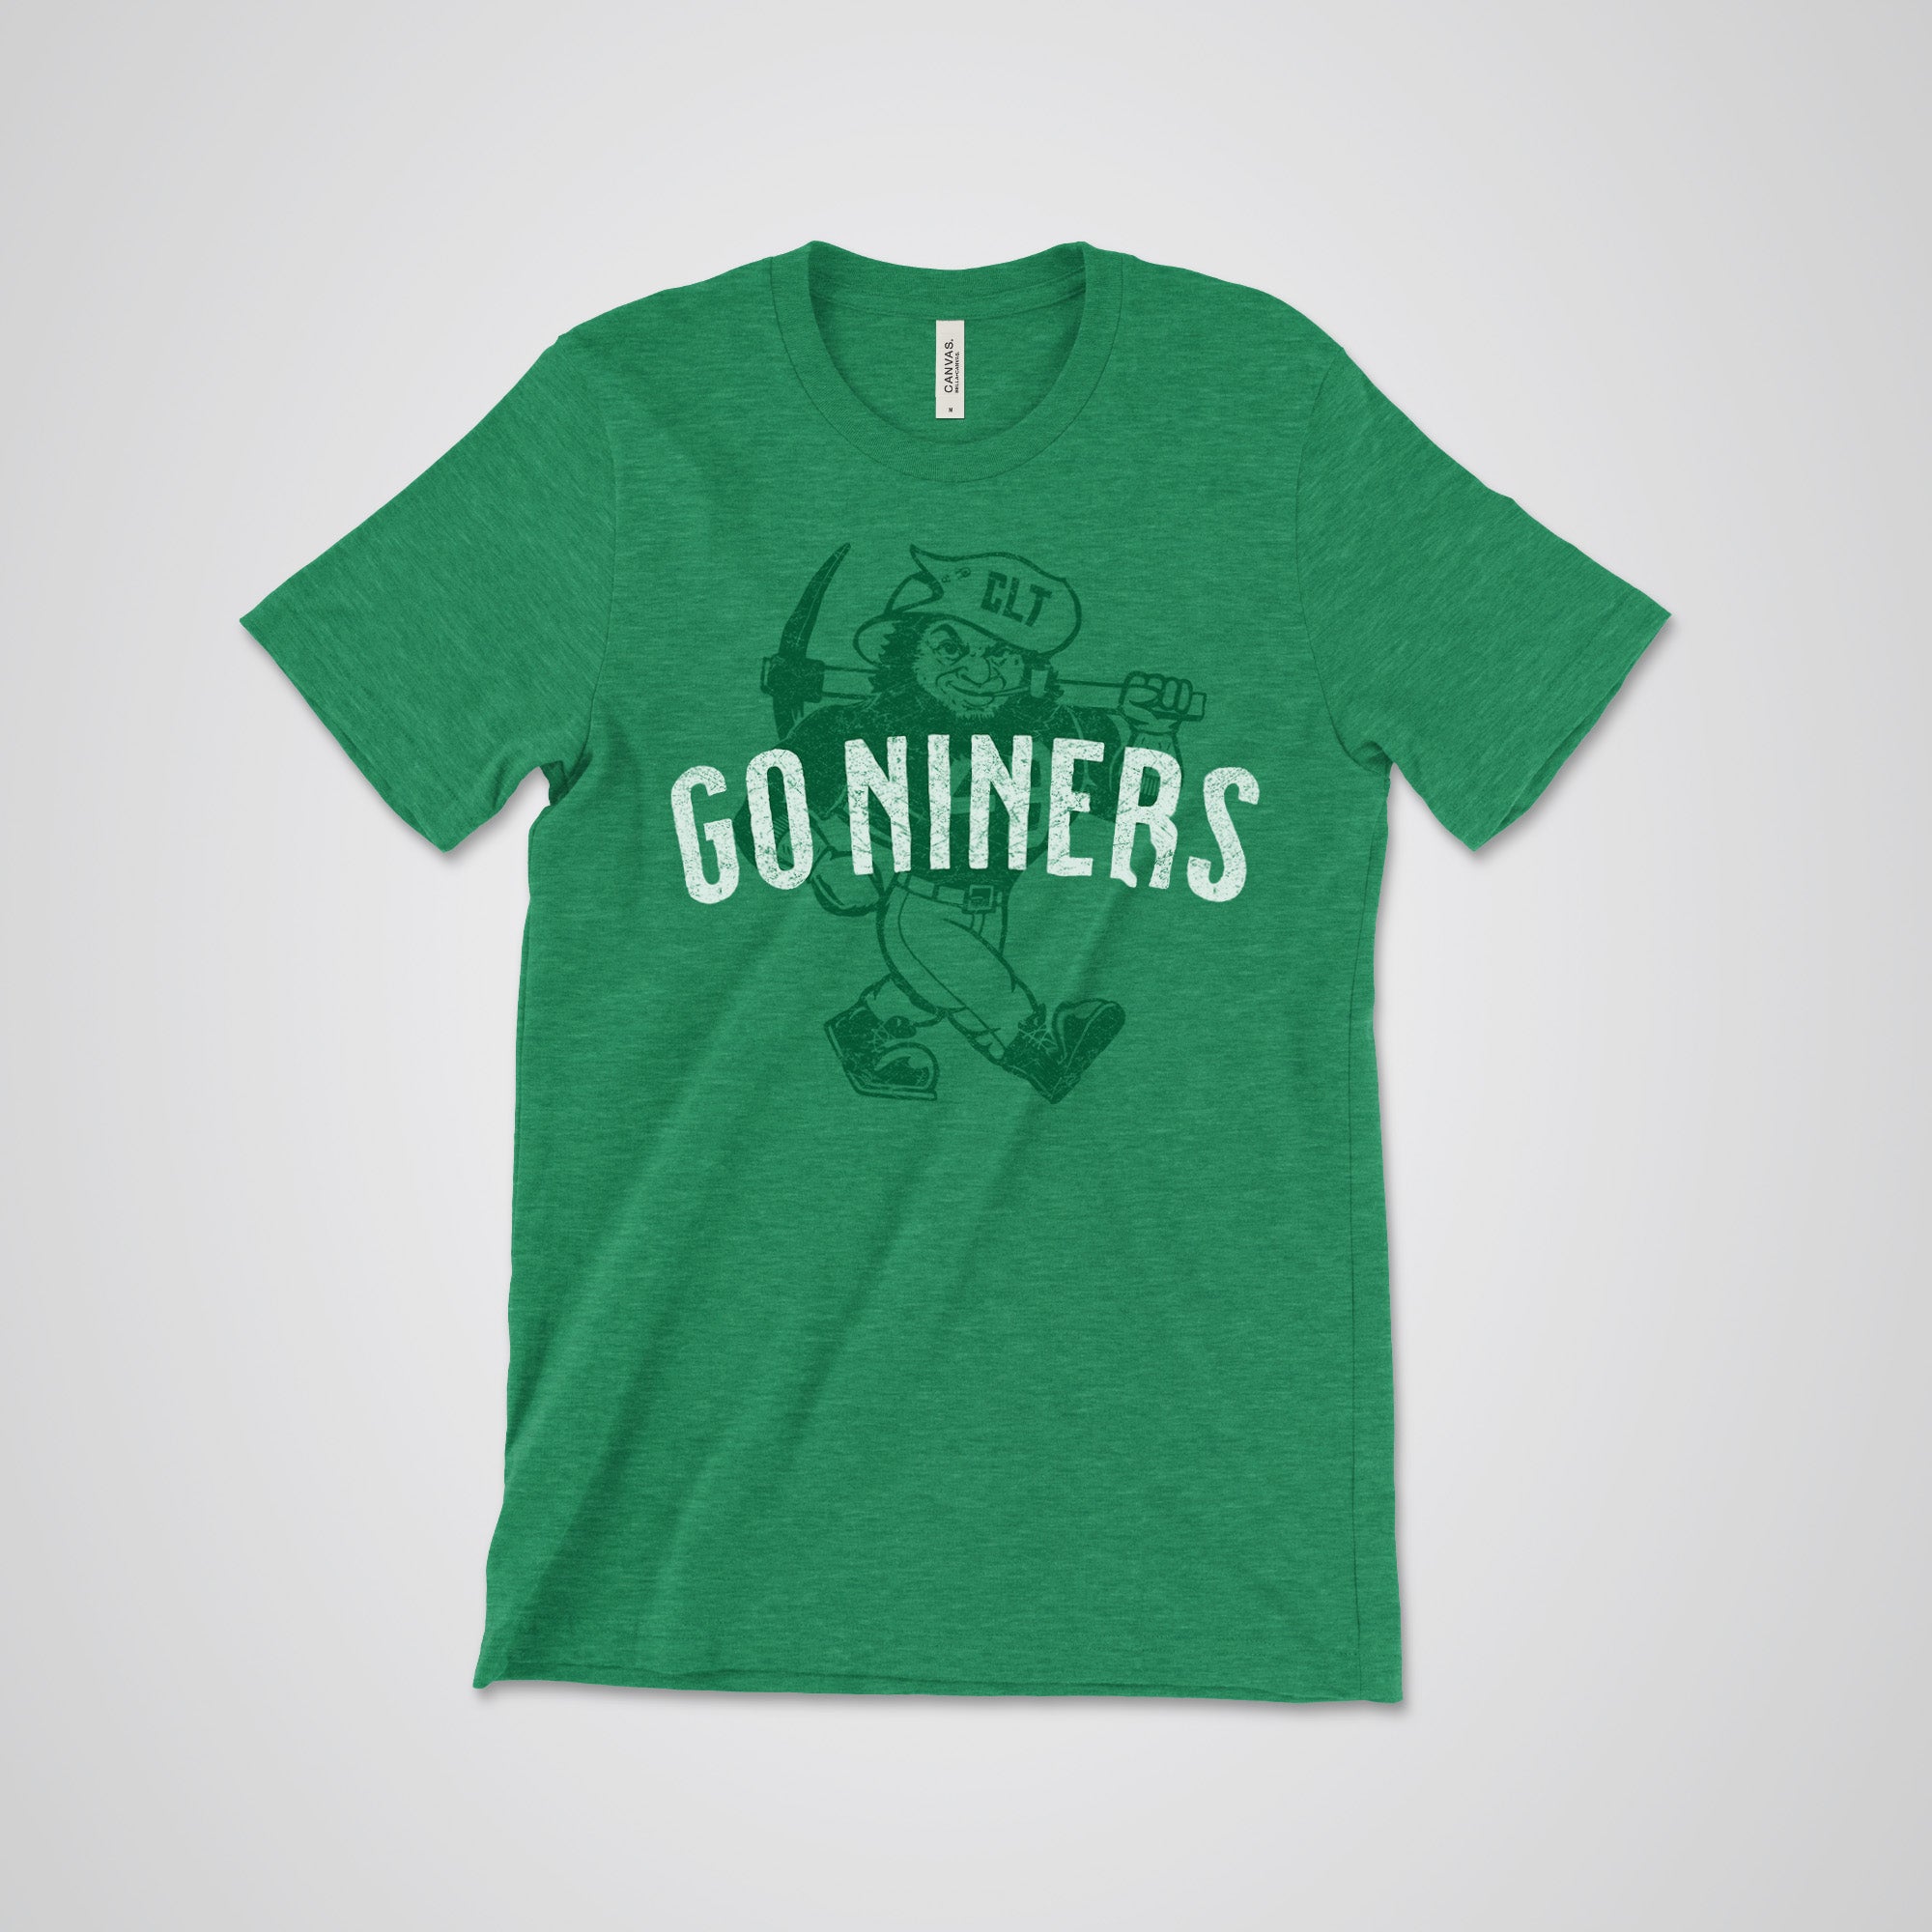 Big Norm From The Block - Go Niners Tee (Unisex)